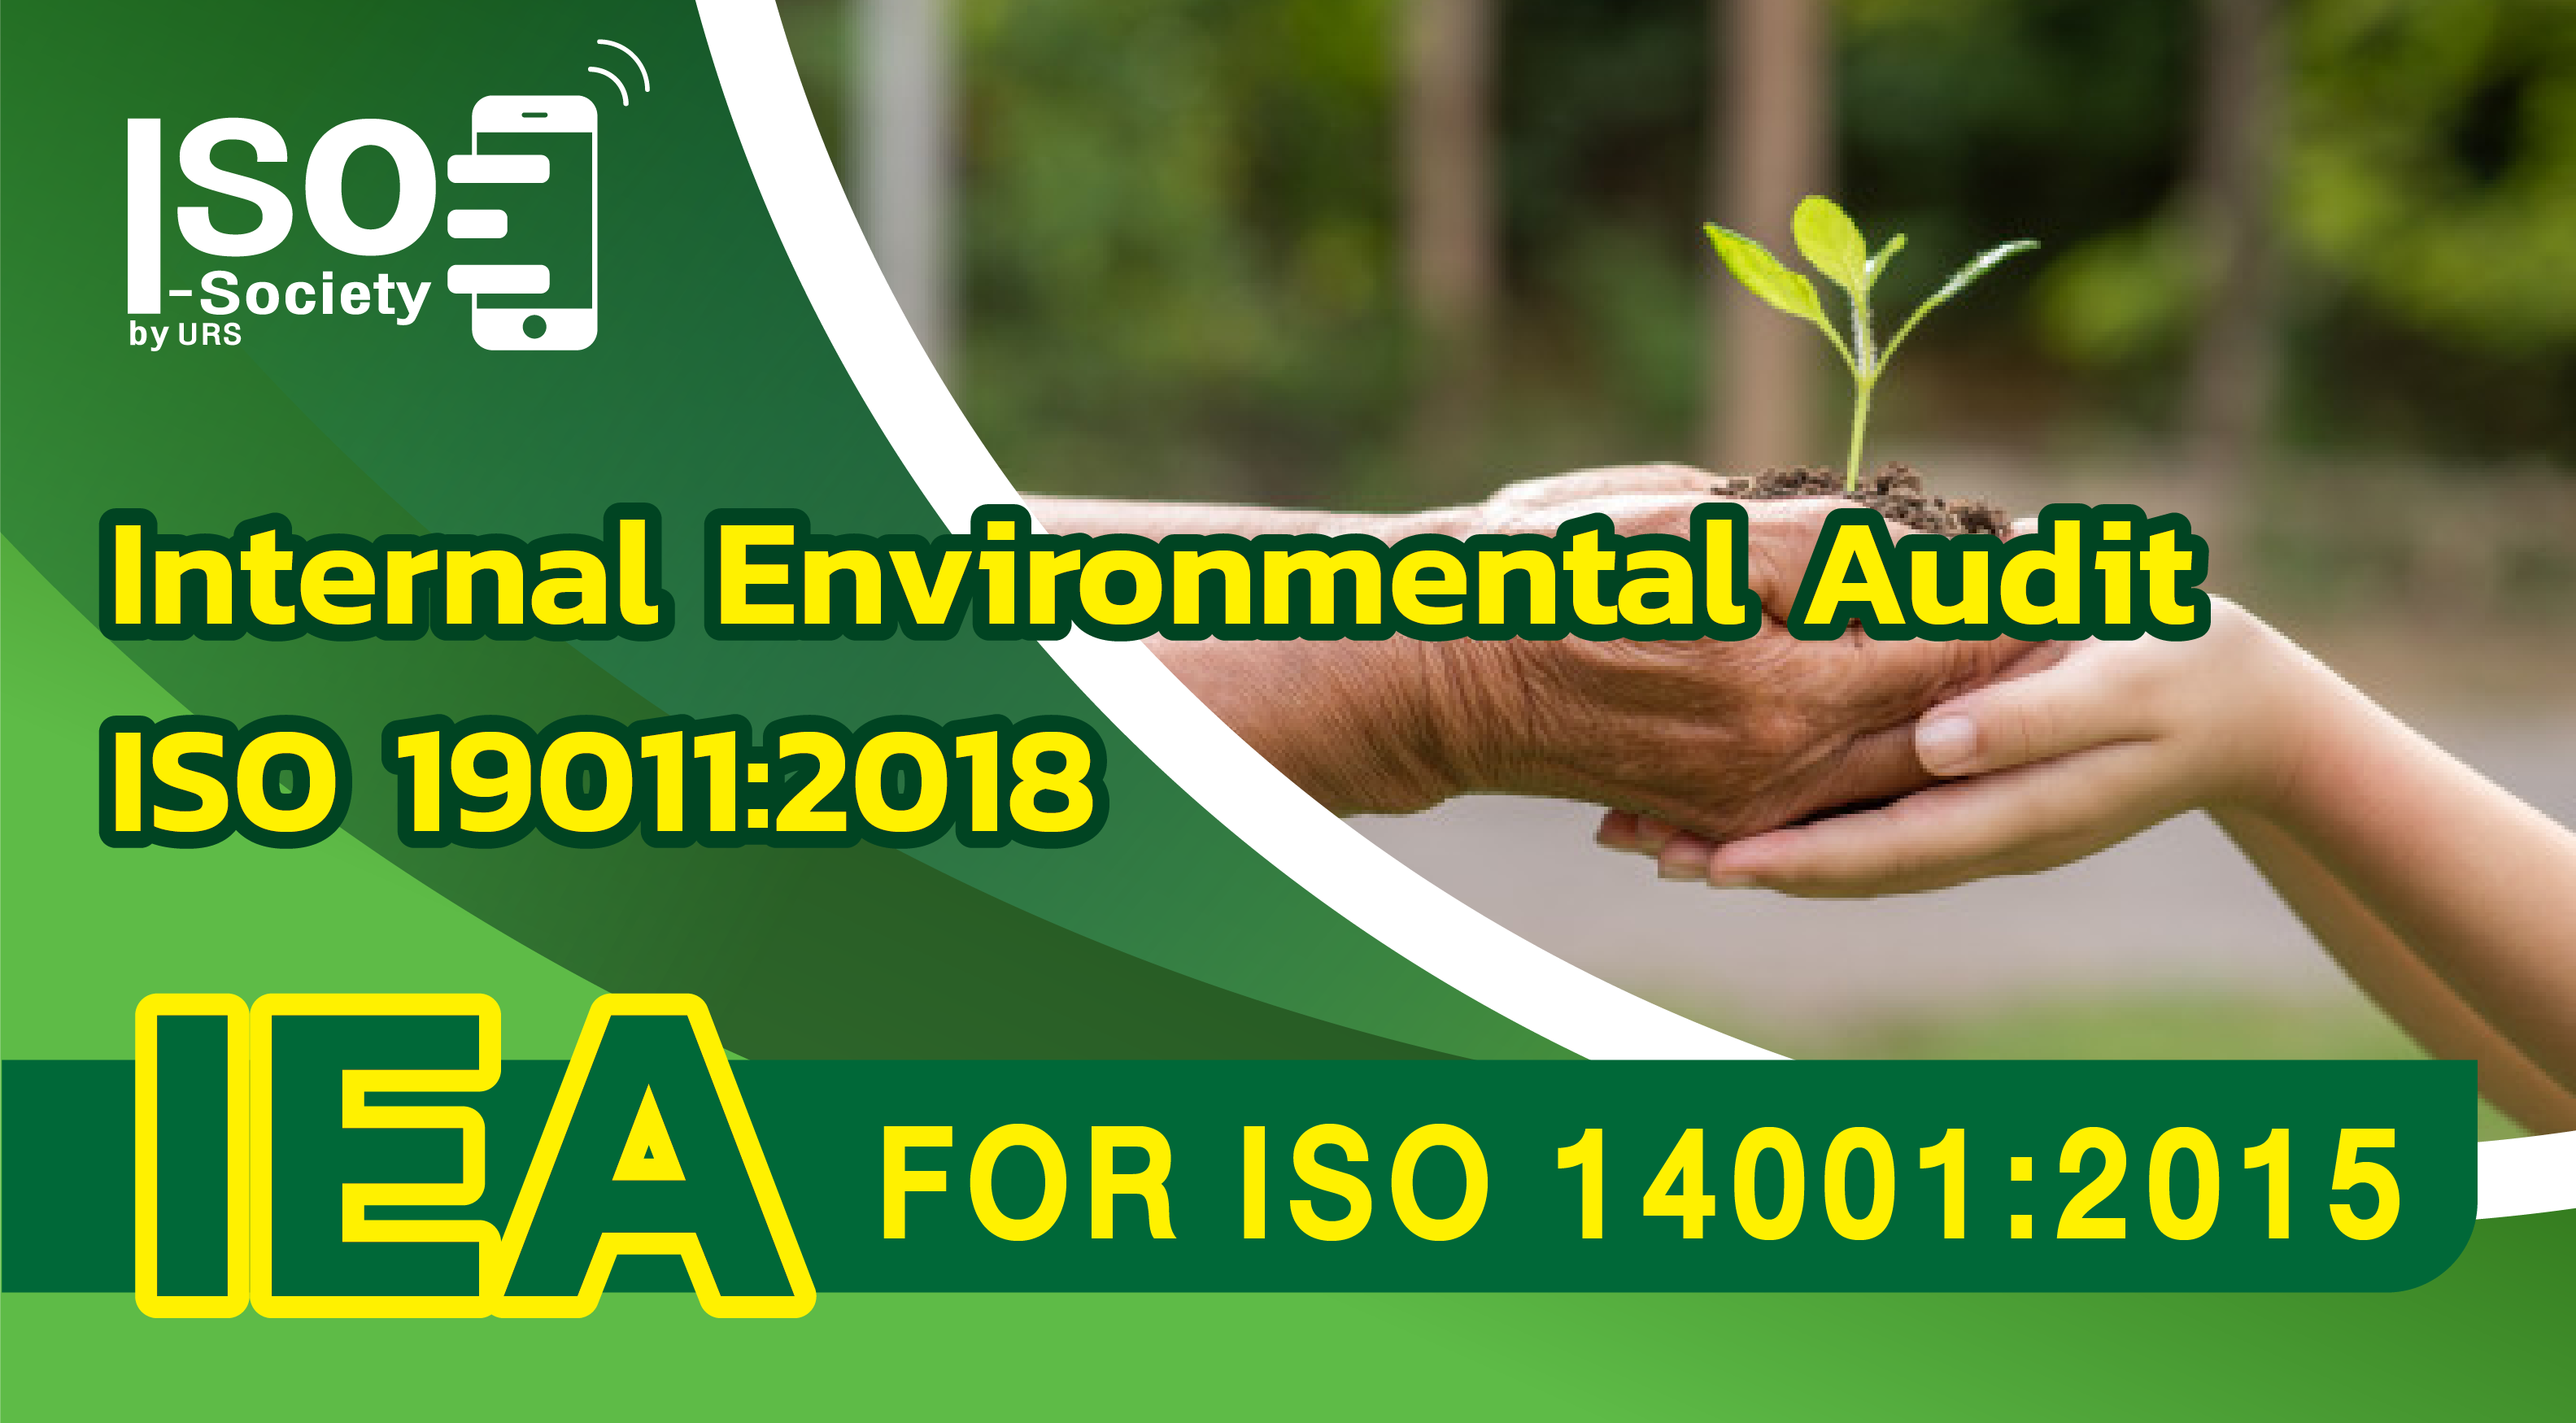 IEA 19011:2018 for ISO 14001:2015